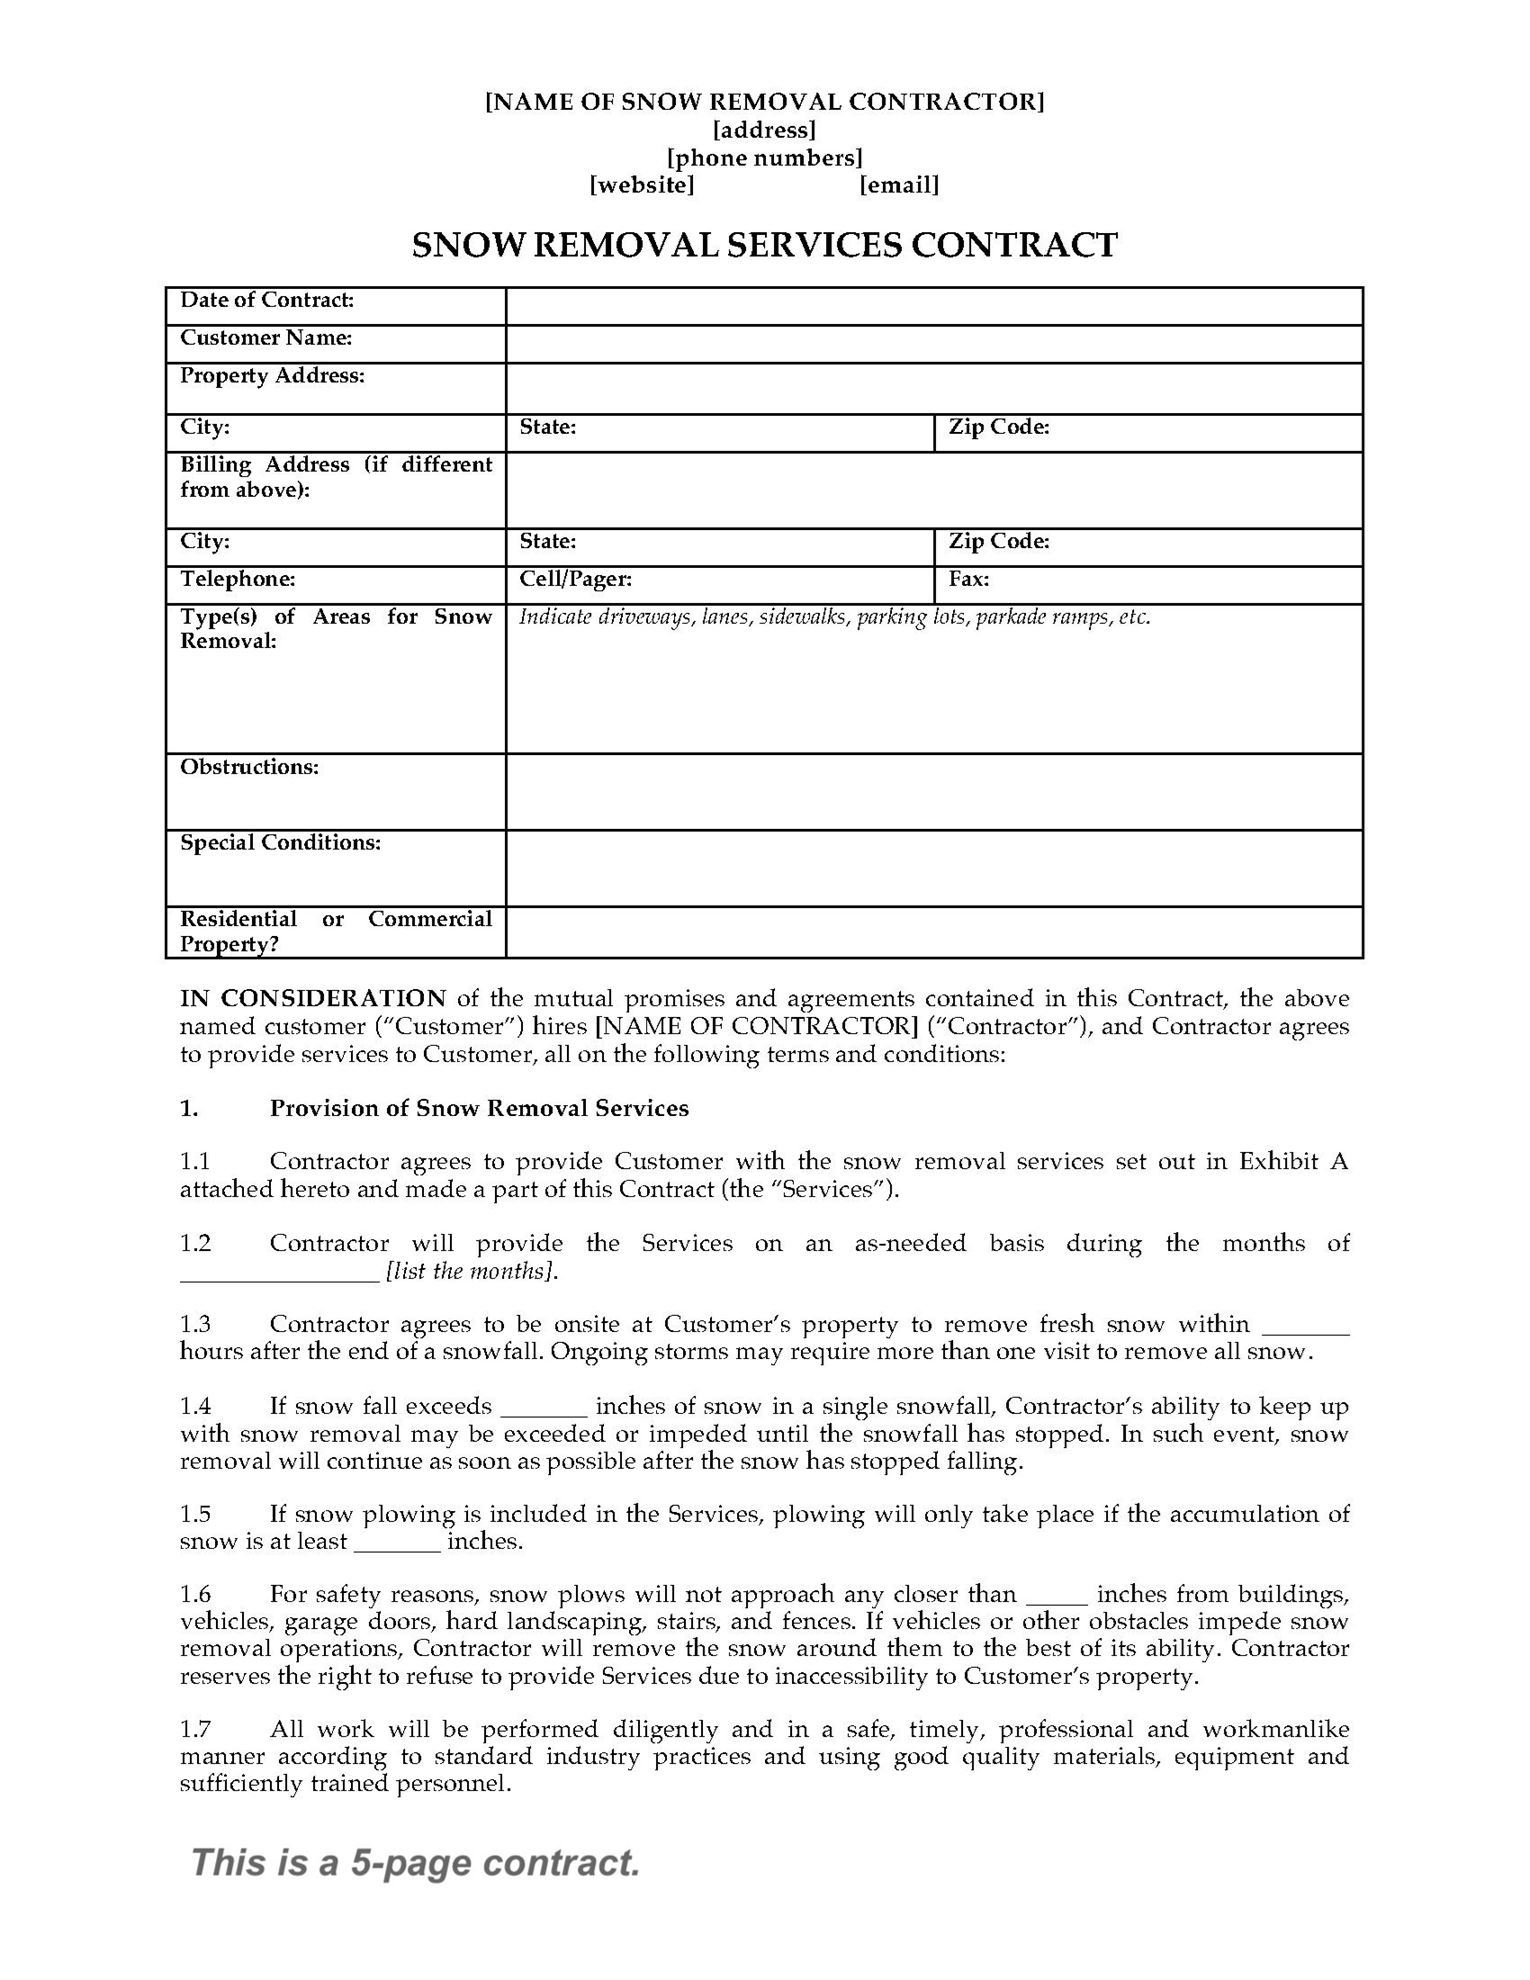 Snow Removal Contract Form Legal Forms And Business Templates Megadox Com